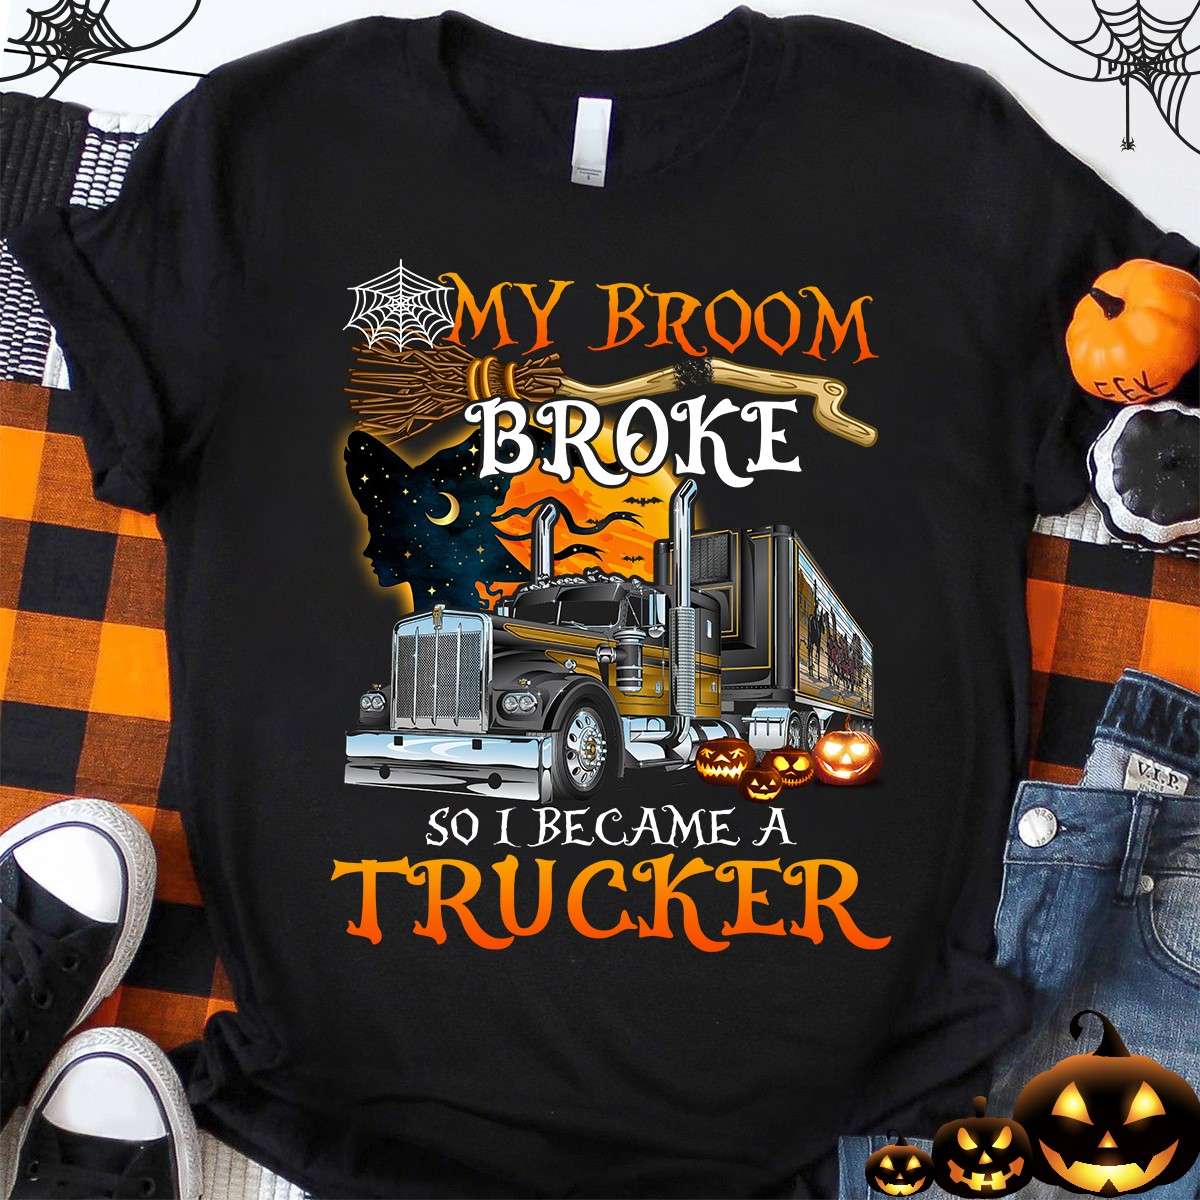 My broom broke so I became a trucker - Witch drive trucks, Halloween gift for trucker